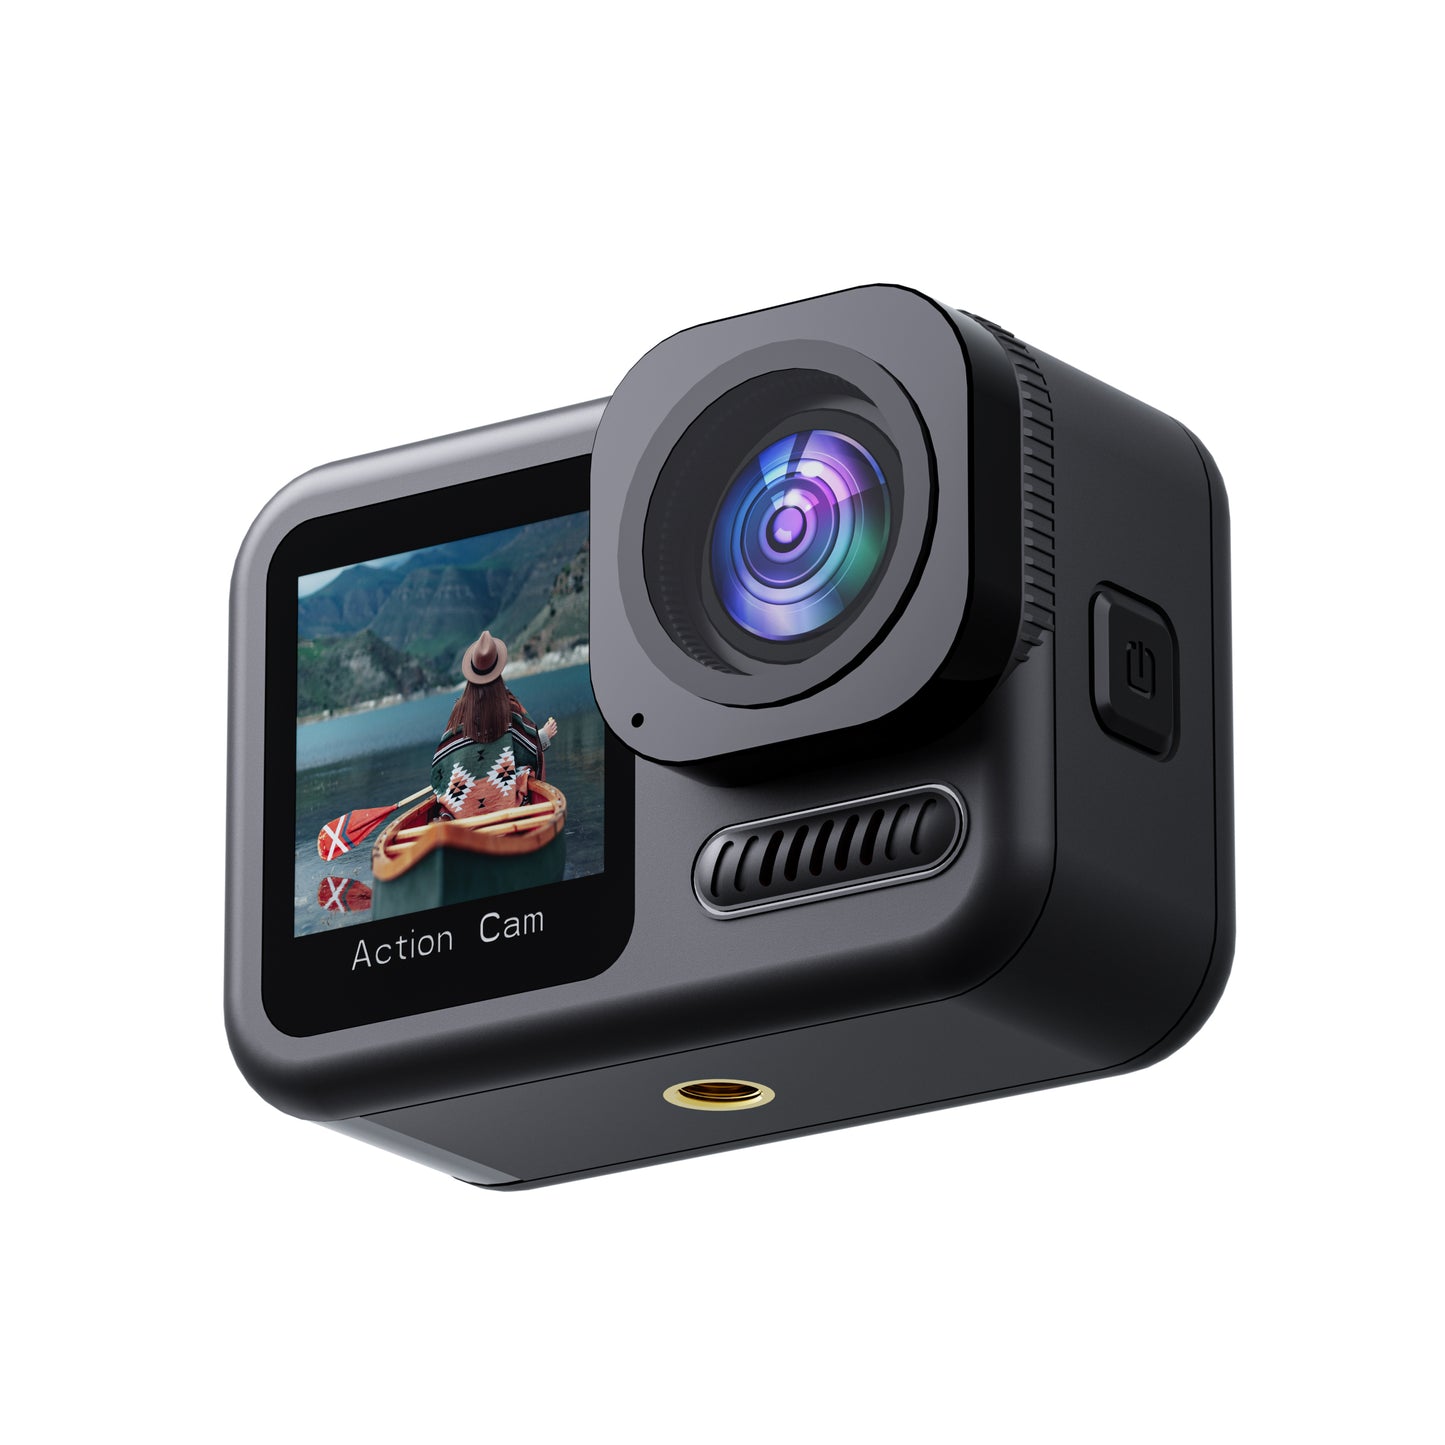 The Bigly Brothers Tribeca 2n2 Action Camera: 20M Body Waterproof, WiFi, 4K 60fps, 6-Axis EIS Anti-Shake, Dual Touch Screen, Wireless Remote Controller with a built-in Microphone